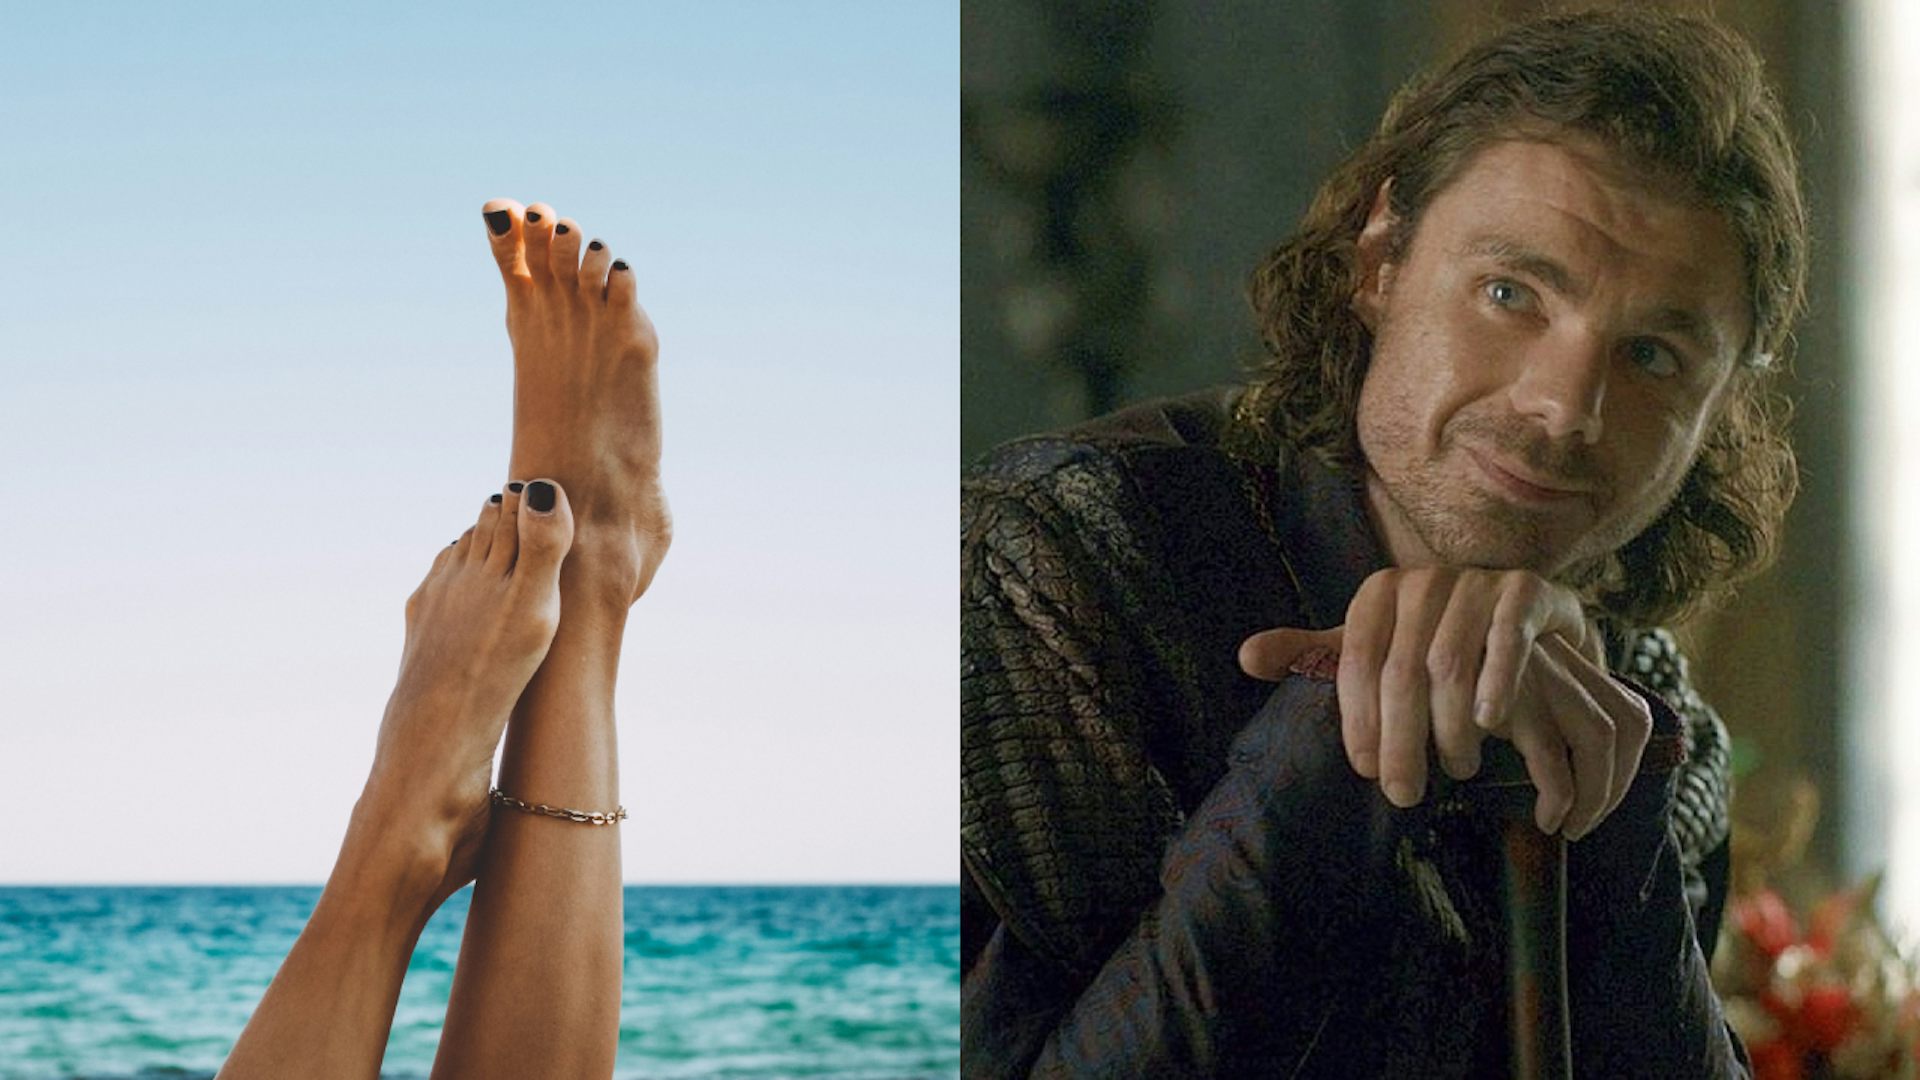 The foot scene in House of the Dragon was upsetting, but its nothing compared to the real history of the fetish photo